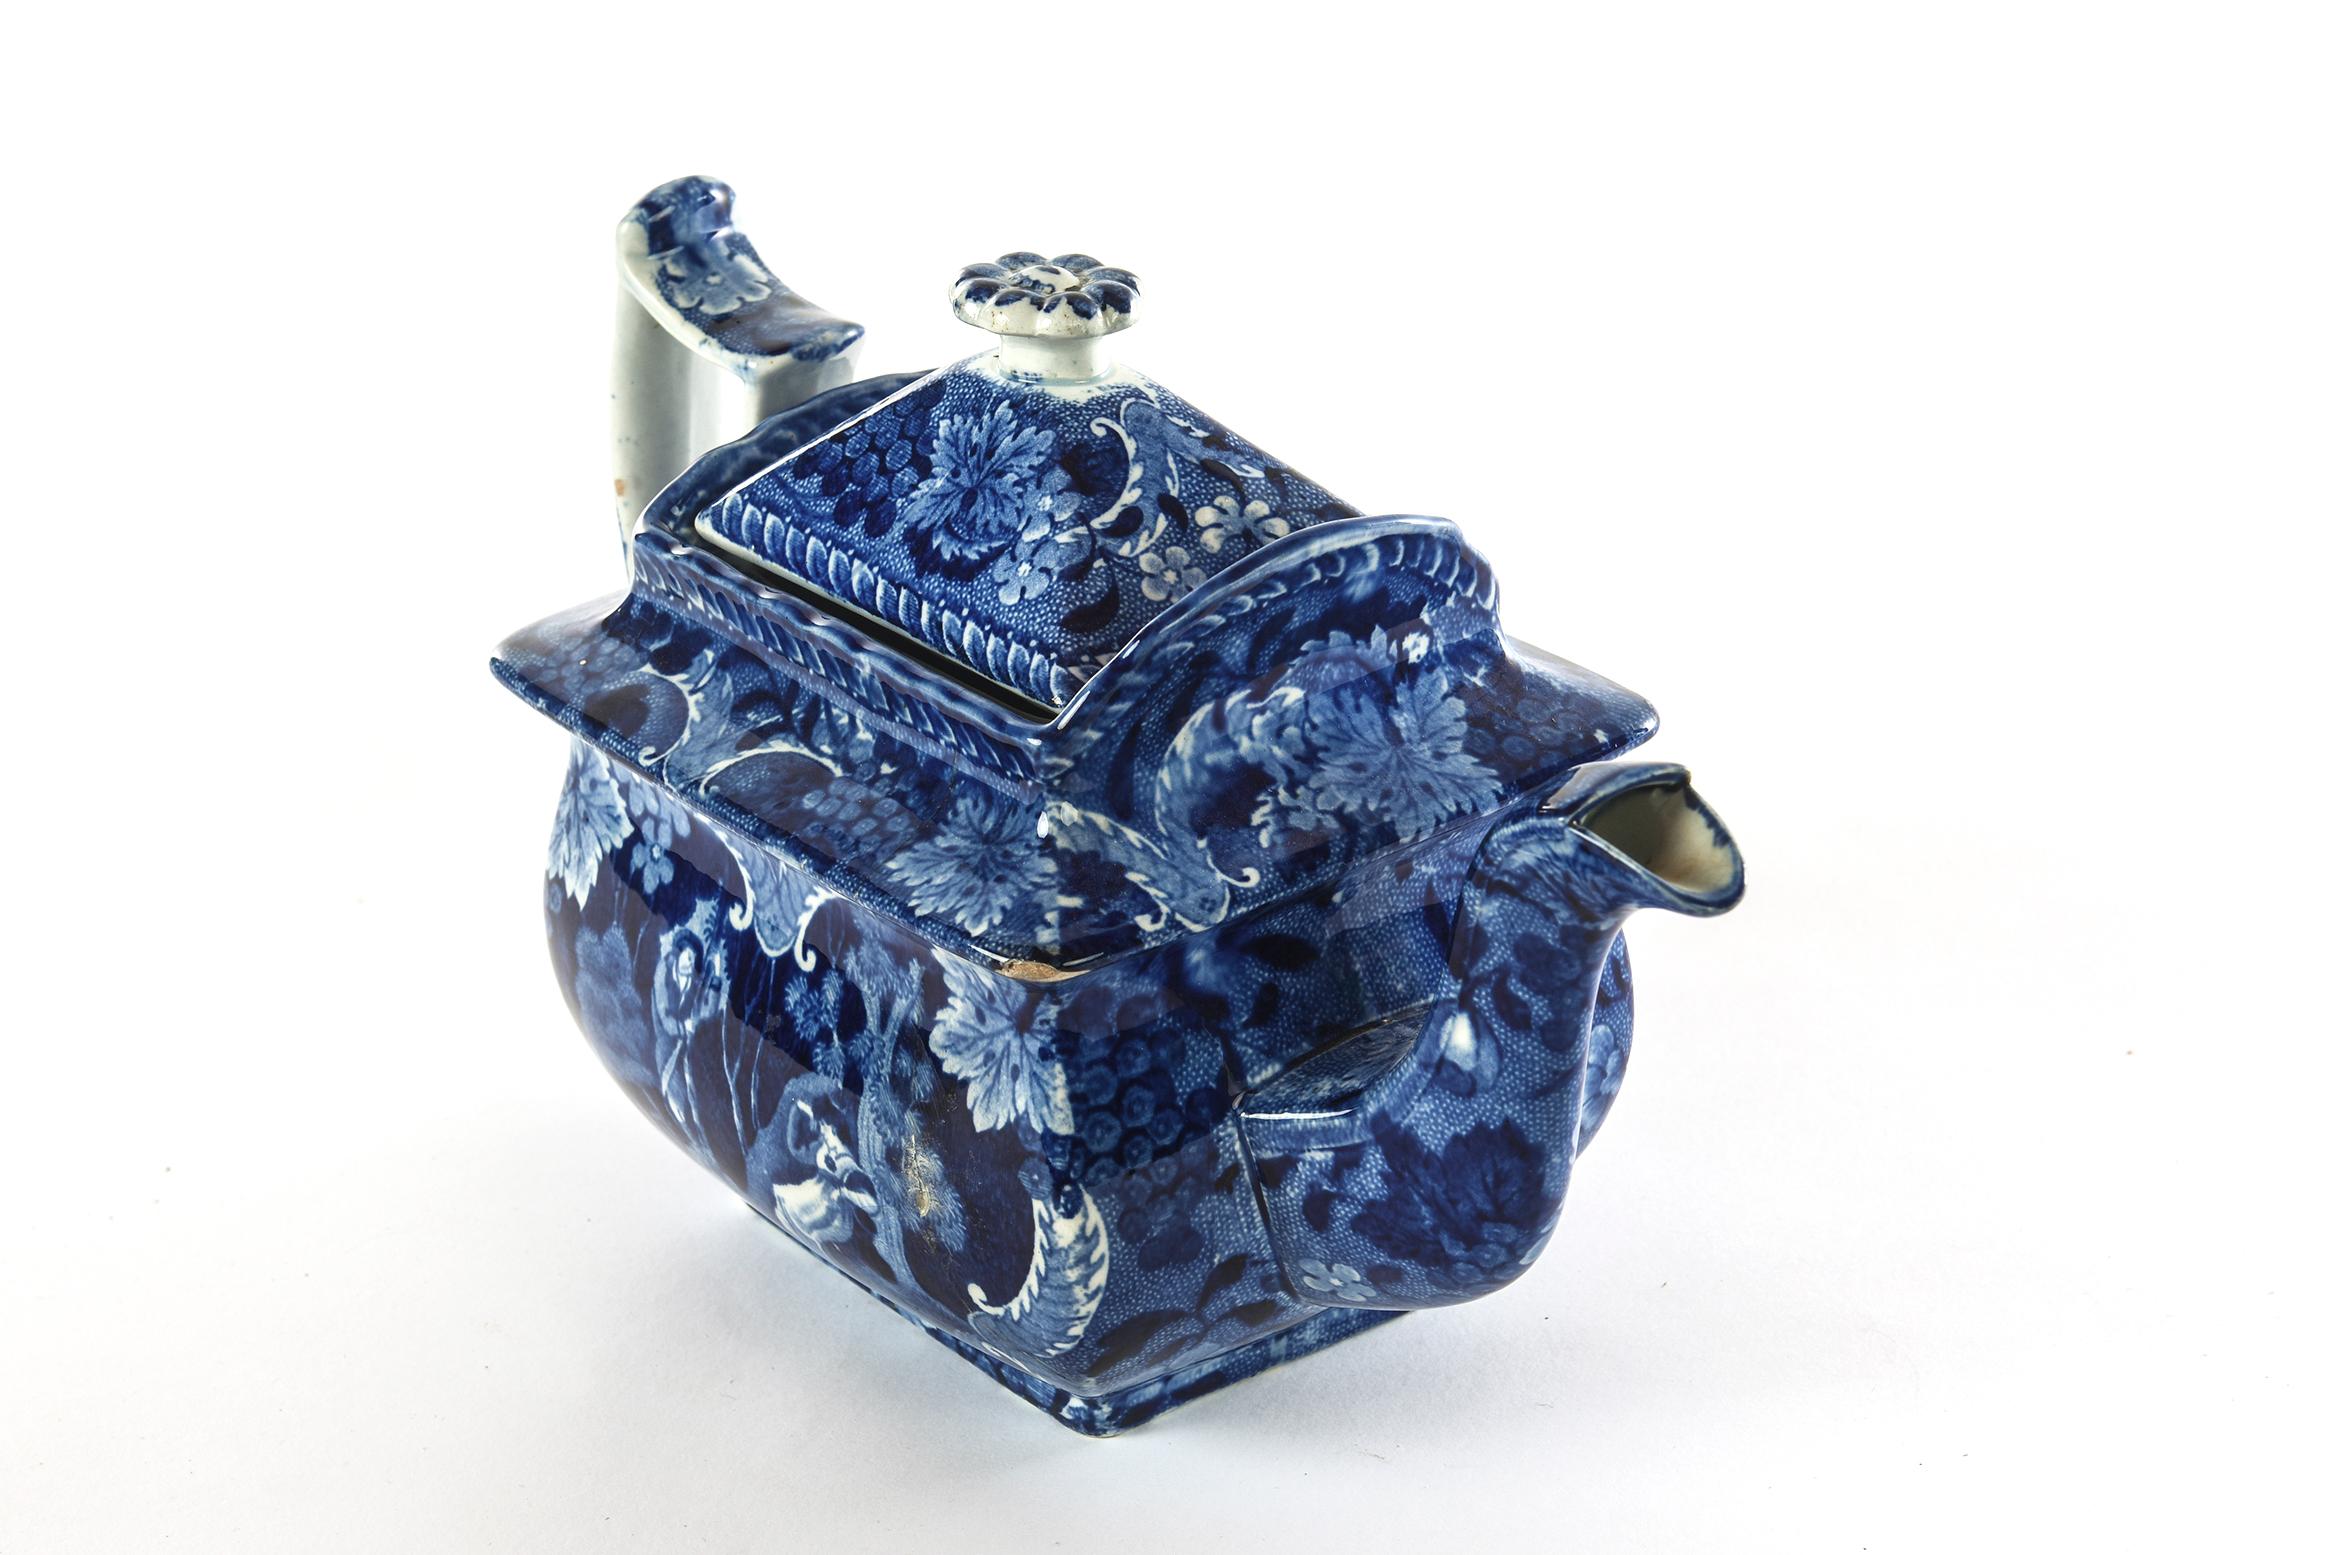 A charming teapot in the popular Victorian Era Flo Blue. This teapot features generous proportions on handle, body and elongated spout with a sweet little flora form finial. In very nice antique condition with just one small chip that does not deter